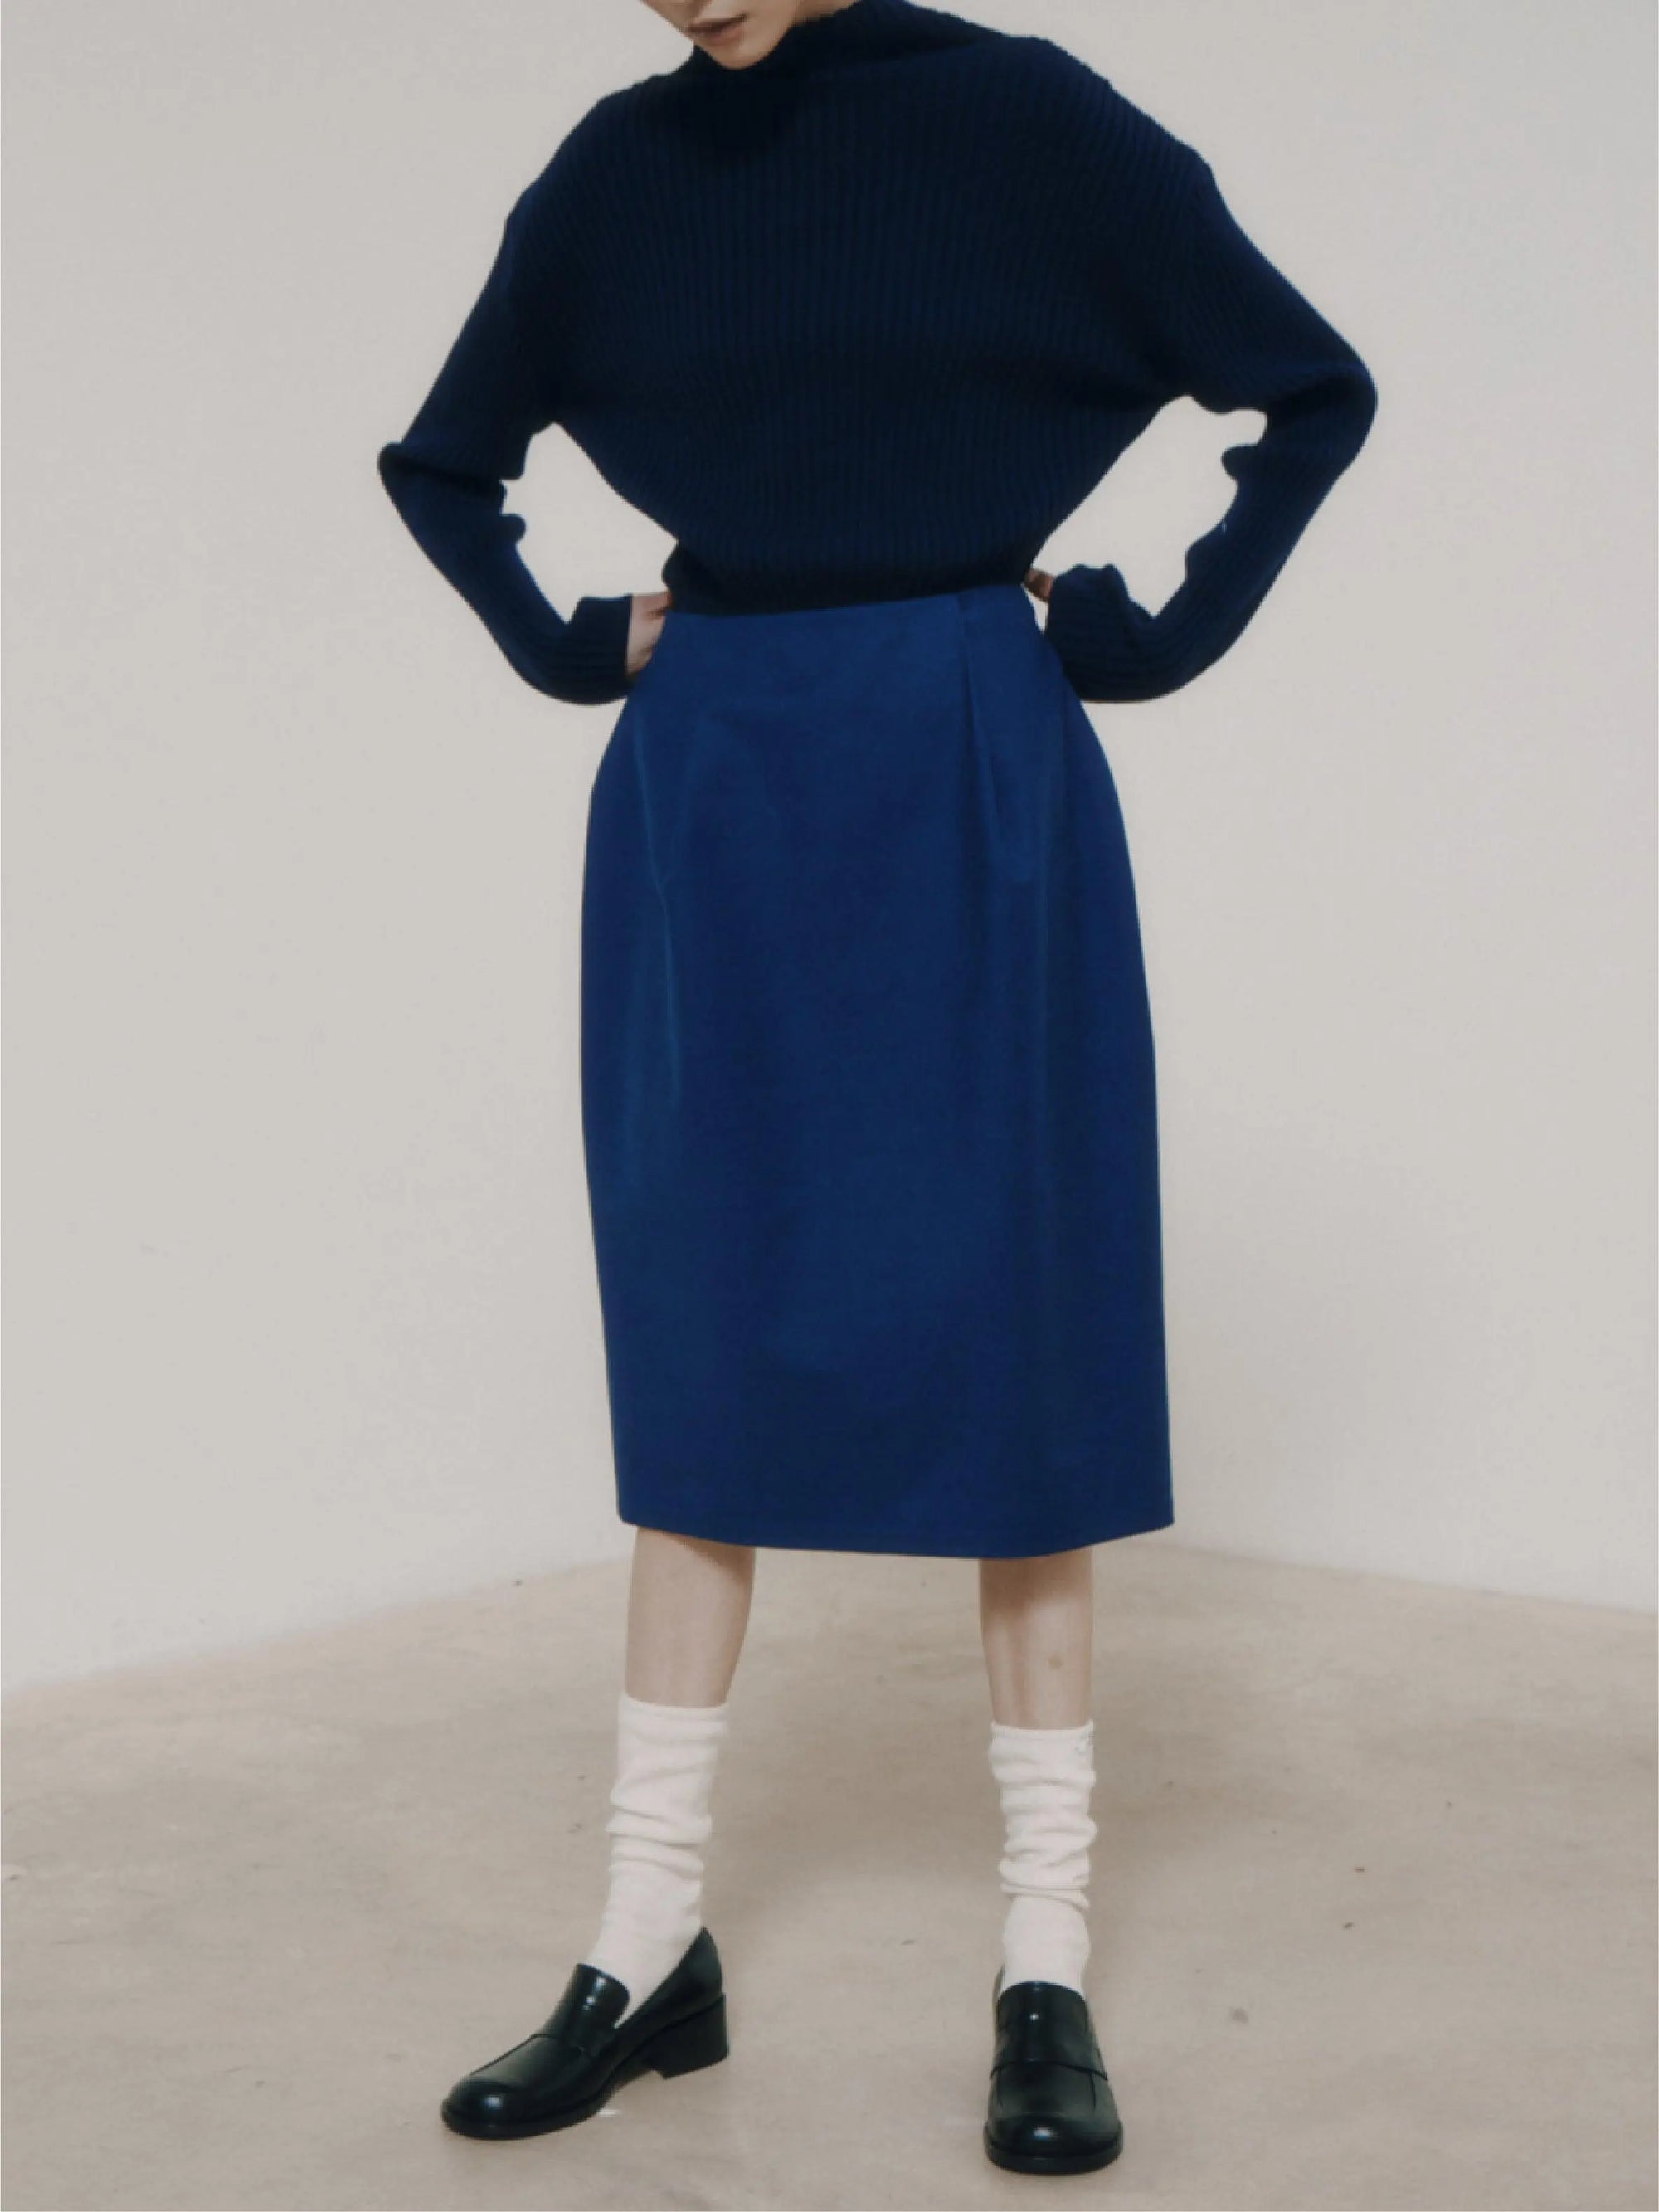 A person wearing a dark blue long-sleeved top is paired with the Amomento Blue Volume Skirt. The outfit, from bassalstore, is complemented by white socks and black loafers. The individual has their hands on their hips and is standing against a neutral background in Barcelona. The face is out of the frame.